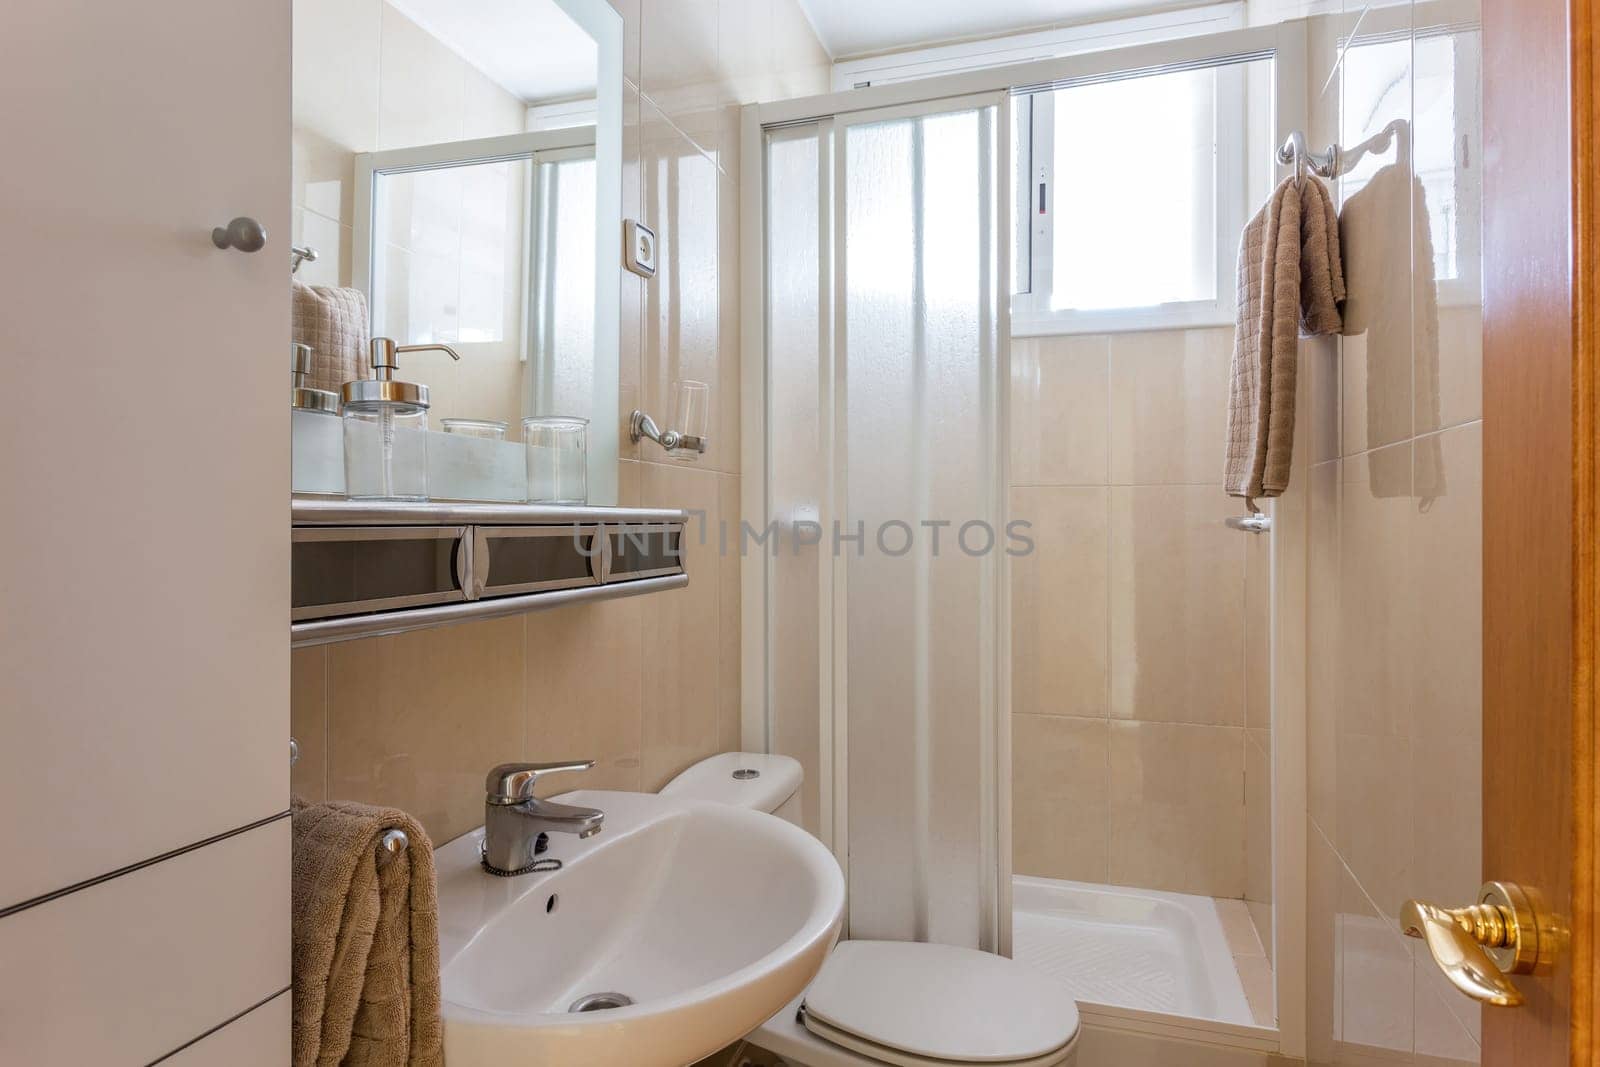 Simple style interior of small restroom with beige ceramic tile walls, white sink, classic WC toilet and shower cabin. by apavlin